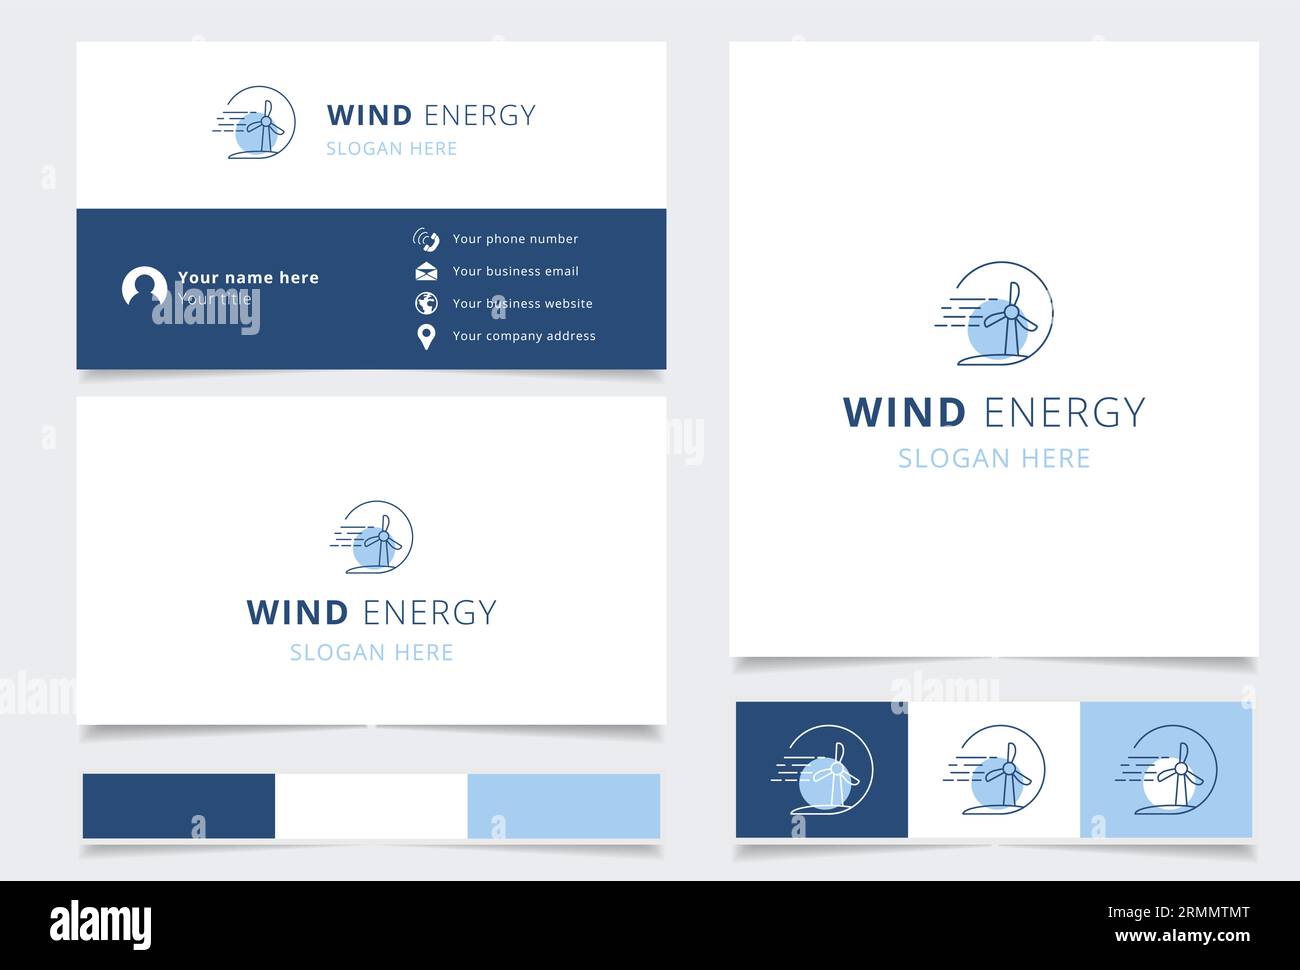 Wind energy logo design with editable slogan. Branding book and business card template. Stock Vector